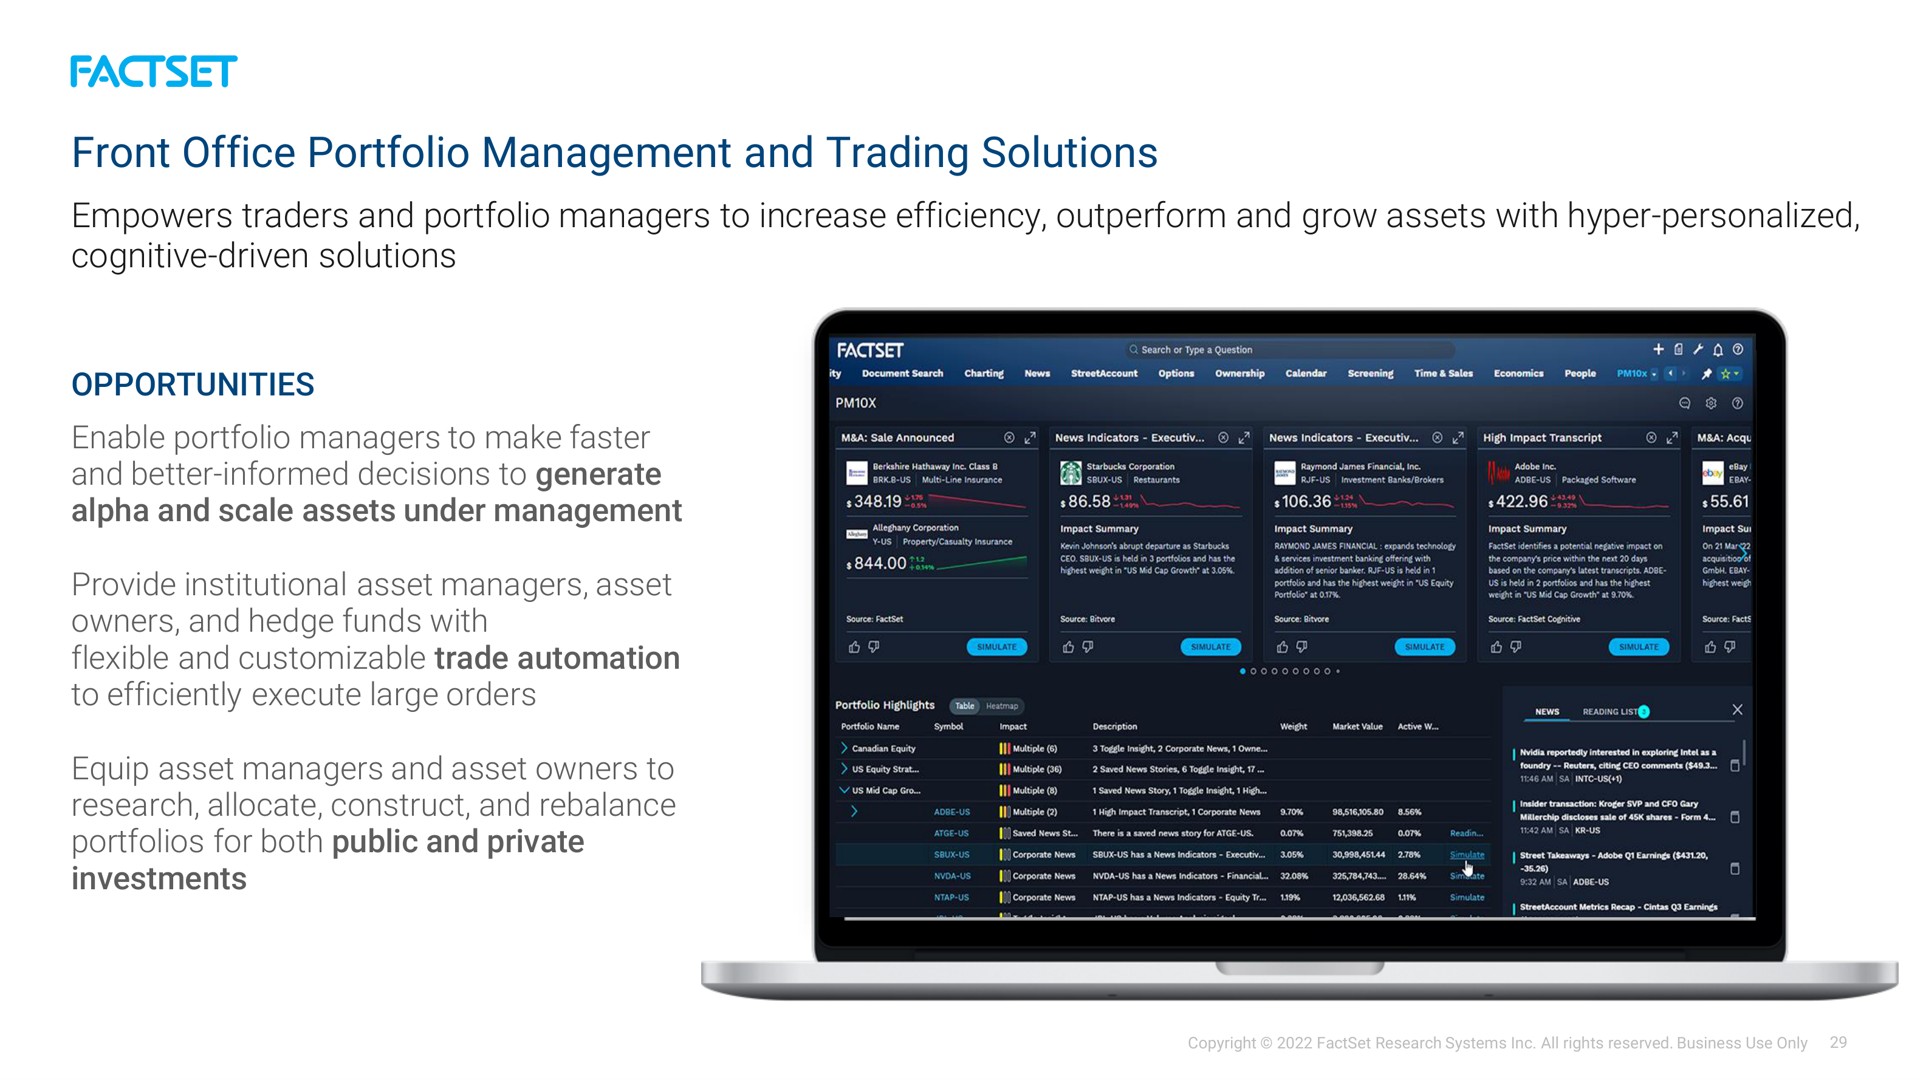 front office portfolio management and trading solutions equip asset managers asset owners to investments soe | Factset